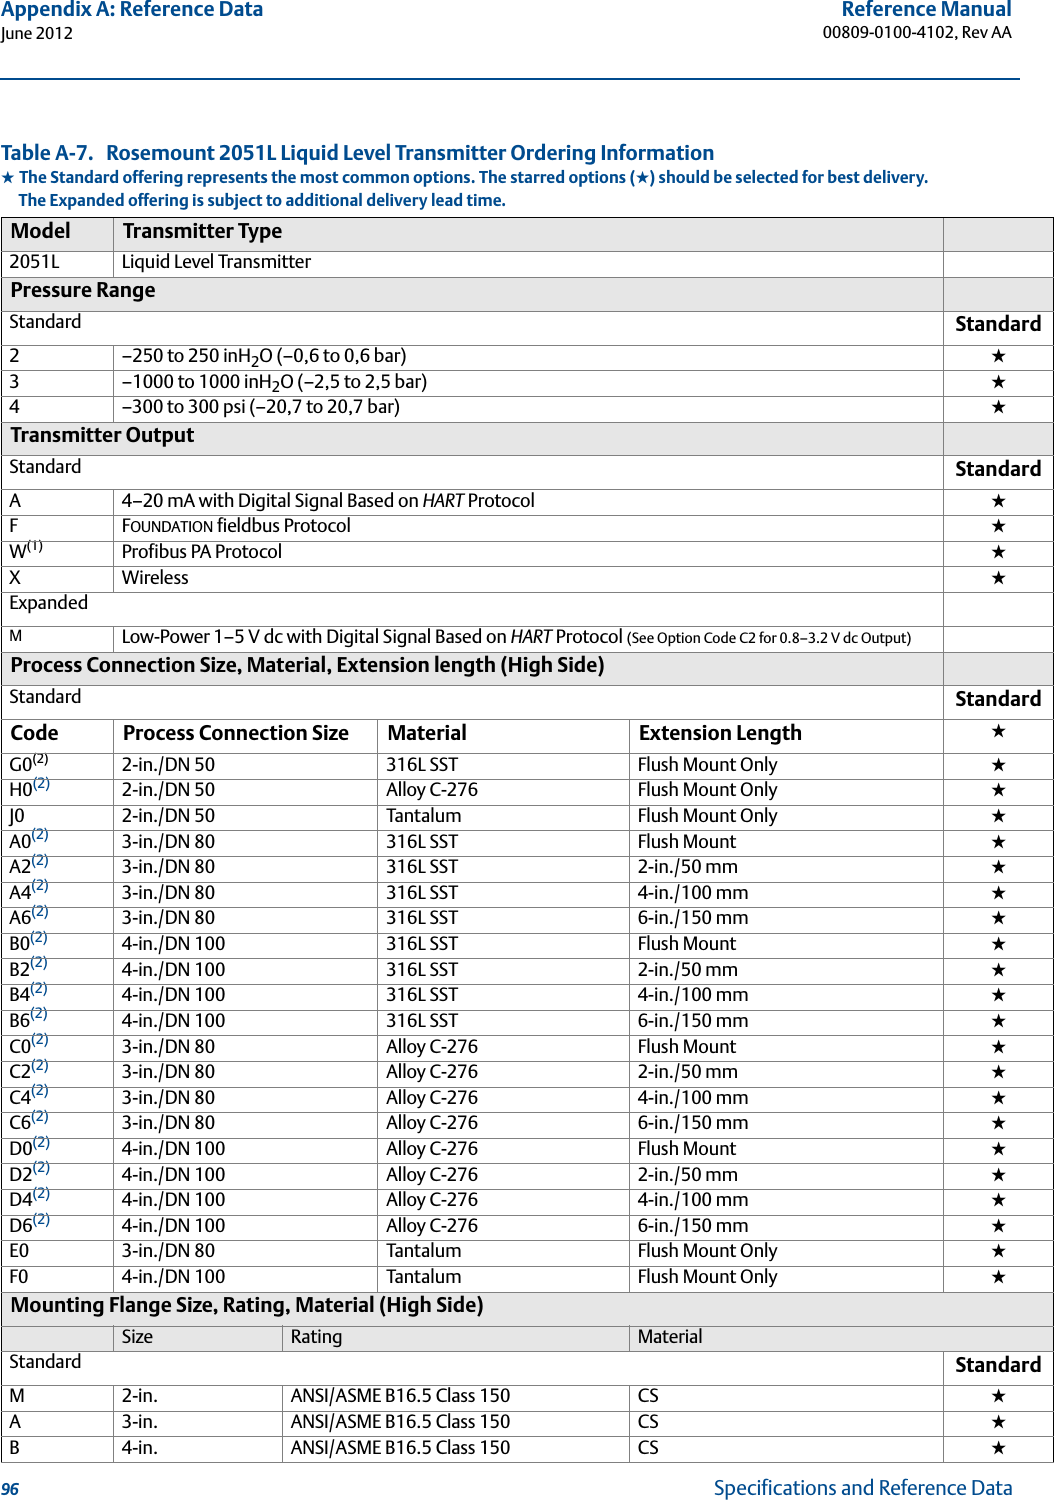 96Reference Manual00809-0100-4102, Rev AAAppendix A: Reference DataJune 2012Specifications and Reference Data      Table A-7.   Rosemount 2051L Liquid Level Transmitter Ordering Information★ The Standard offering represents the most common options. The starred options (★) should be selected for best delivery.__The Expanded offering is subject to additional delivery lead time.Model Transmitter Type2051L Liquid Level TransmitterPressure RangeStandard Standard2–250 to 250 inH2O (–0,6 to 0,6 bar) ★3–1000 to 1000 inH2O (–2,5 to 2,5 bar) ★4–300 to 300 psi (–20,7 to 20,7 bar) ★Transmitter OutputStandard StandardA4–20 mA with Digital Signal Based on HART Protocol ★F FOUNDATION fieldbus Protocol ★W(1) Profibus PA Protocol ★XWireless ★ExpandedMLow-Power 1–5 V dc with Digital Signal Based on HART Protocol (See Option Code C2 for 0.8–3.2 V dc Output) Process Connection Size, Material, Extension length (High Side)Standard StandardCode Process Connection Size Material Extension Length ★G0(2) 2-in./DN 50 316L SST Flush Mount Only ★H0(2) 2-in./DN 50 Alloy C-276 Flush Mount Only ★J0 2-in./DN 50 Tantalum Flush Mount Only ★A0(2) 3-in./DN 80 316L SST Flush Mount ★A2(2) 3-in./DN 80 316L SST 2-in./50 mm ★A4(2) 3-in./DN 80 316L SST 4-in./100 mm ★A6(2) 3-in./DN 80 316L SST 6-in./150 mm ★B0(2) 4-in./DN 100 316L SST Flush Mount ★B2(2) 4-in./DN 100 316L SST 2-in./50 mm ★B4(2) 4-in./DN 100 316L SST 4-in./100 mm ★B6(2) 4-in./DN 100 316L SST 6-in./150 mm ★C0(2) 3-in./DN 80 Alloy C-276 Flush Mount ★C2(2) 3-in./DN 80 Alloy C-276 2-in./50 mm ★C4(2) 3-in./DN 80 Alloy C-276 4-in./100 mm ★C6(2) 3-in./DN 80 Alloy C-276 6-in./150 mm ★D0(2) 4-in./DN 100 Alloy C-276 Flush Mount ★D2(2) 4-in./DN 100 Alloy C-276 2-in./50 mm ★D4(2) 4-in./DN 100 Alloy C-276 4-in./100 mm ★D6(2) 4-in./DN 100 Alloy C-276 6-in./150 mm ★E0 3-in./DN 80 Tantalum Flush Mount Only ★F0 4-in./DN 100 Tantalum Flush Mount Only ★Mounting Flange Size, Rating, Material (High Side)Size Rating MaterialStandard StandardM2-in. ANSI/ASME B16.5 Class 150 CS ★A3-in. ANSI/ASME B16.5 Class 150 CS ★B4-in. ANSI/ASME B16.5 Class 150 CS ★